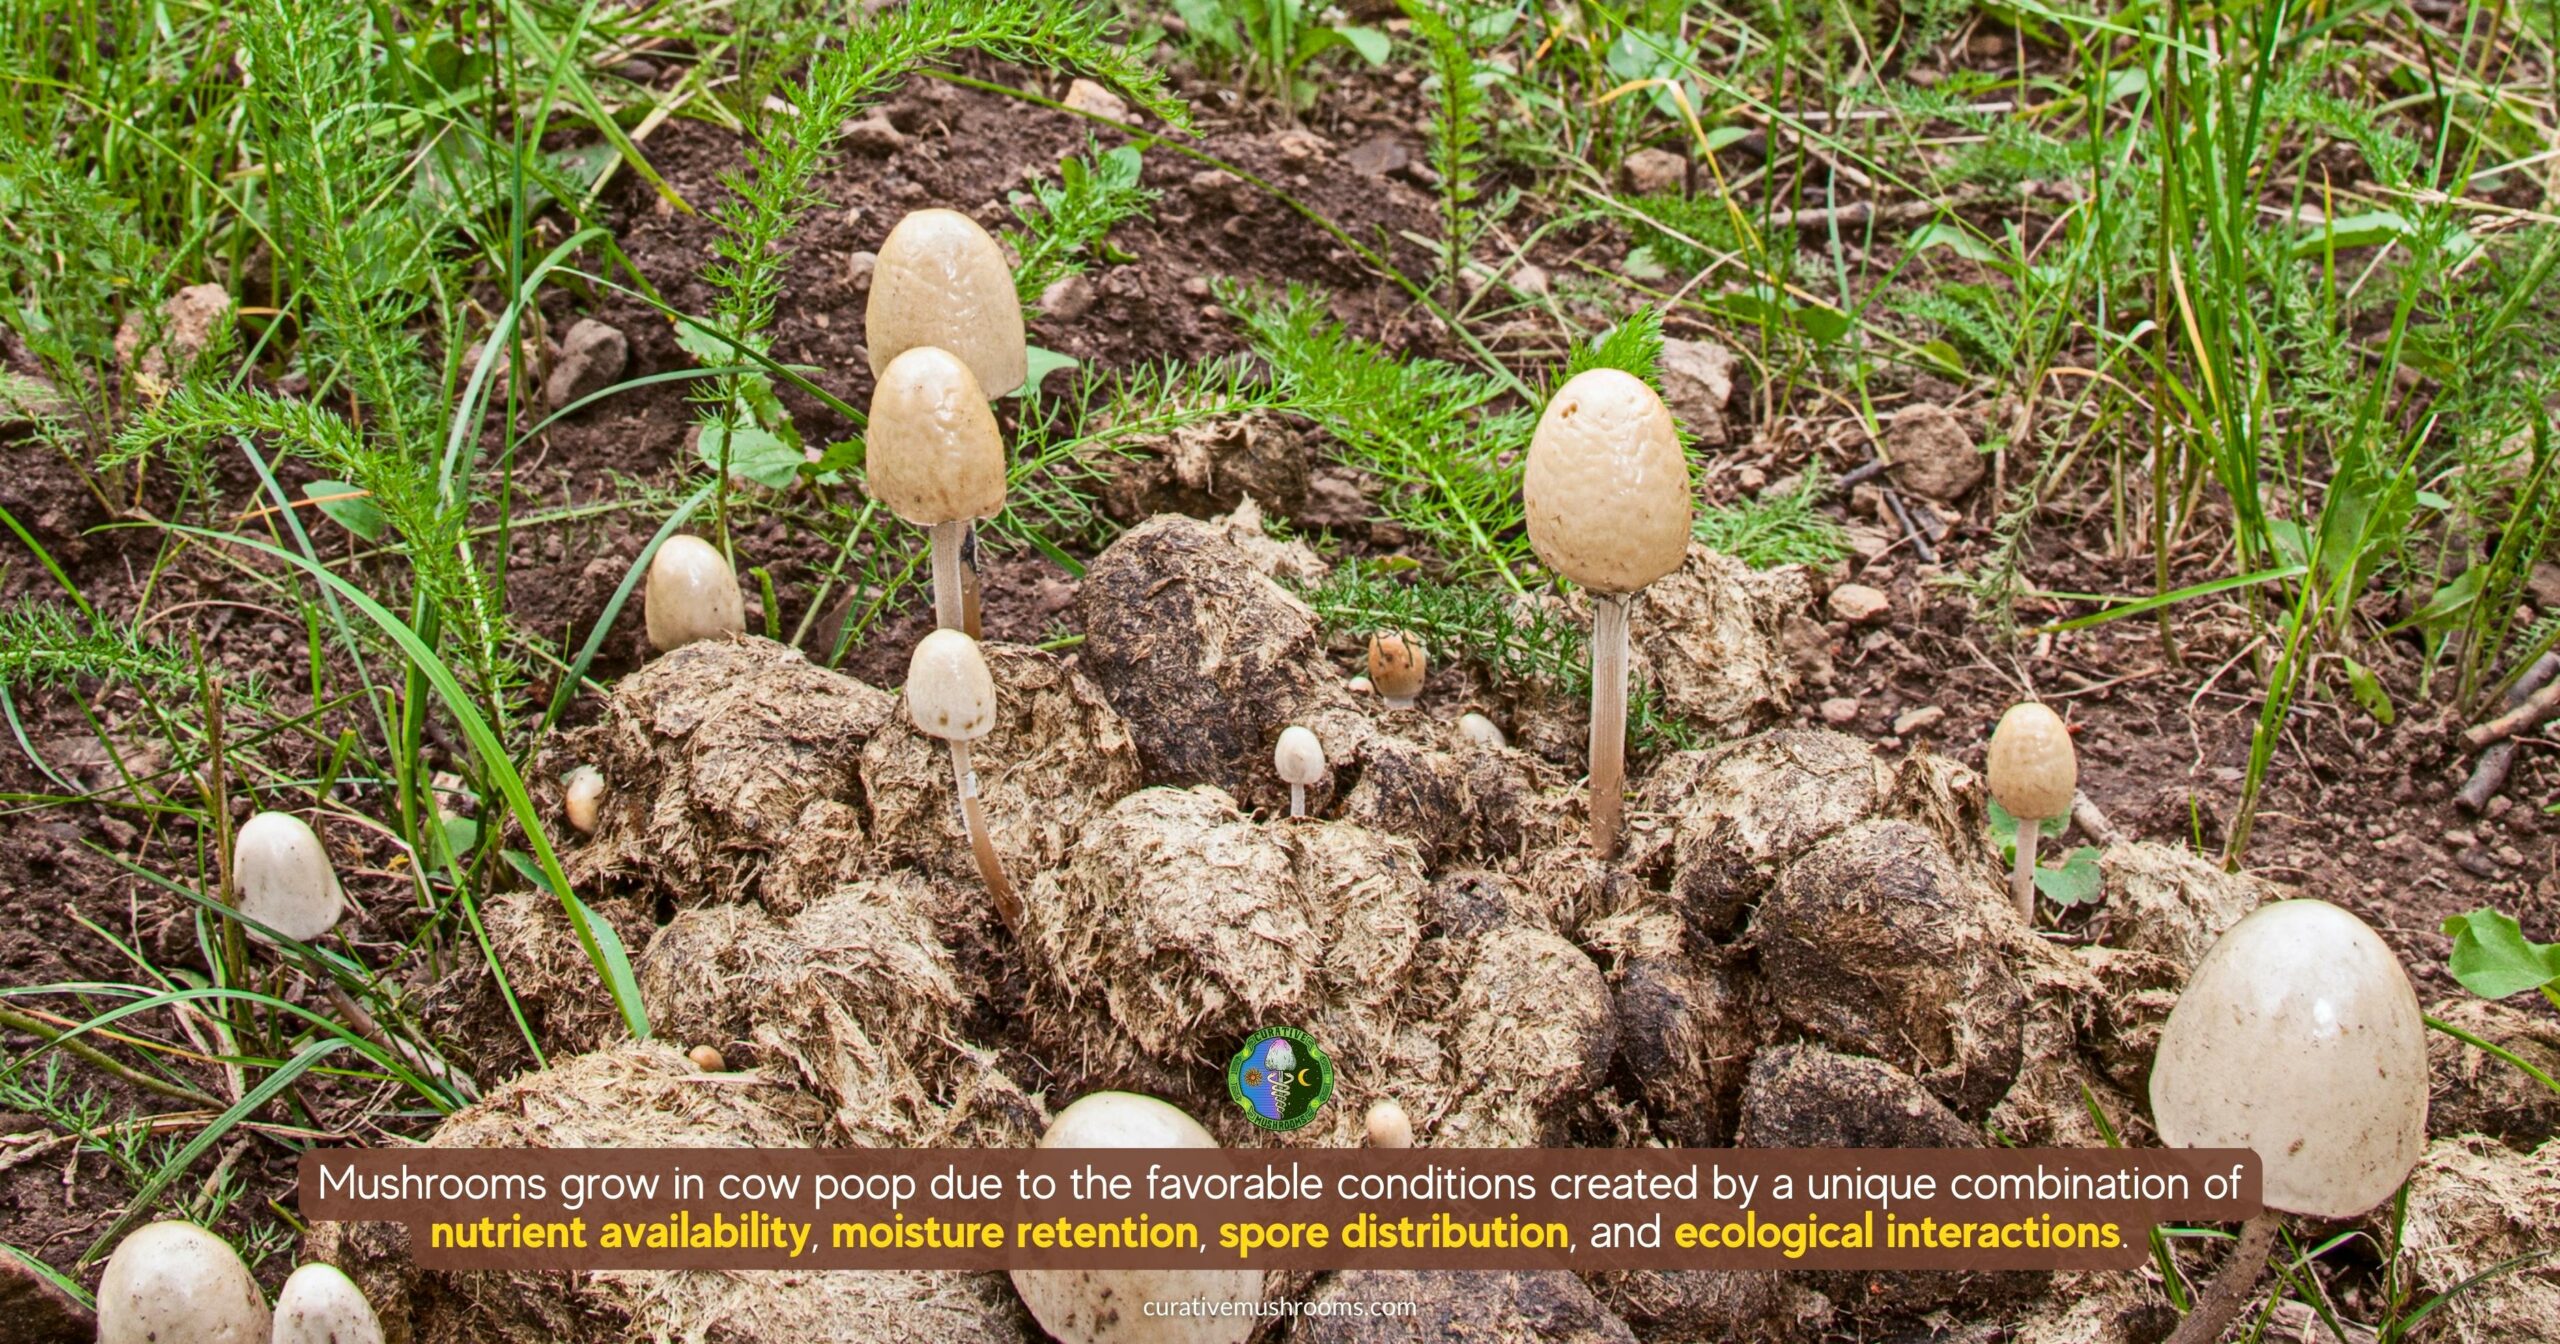 Why do mushrooms grow in cow poop - favorable conditions created by a unique combination of nutrient availability, moisture retention, spore distribution, and ecological interactions